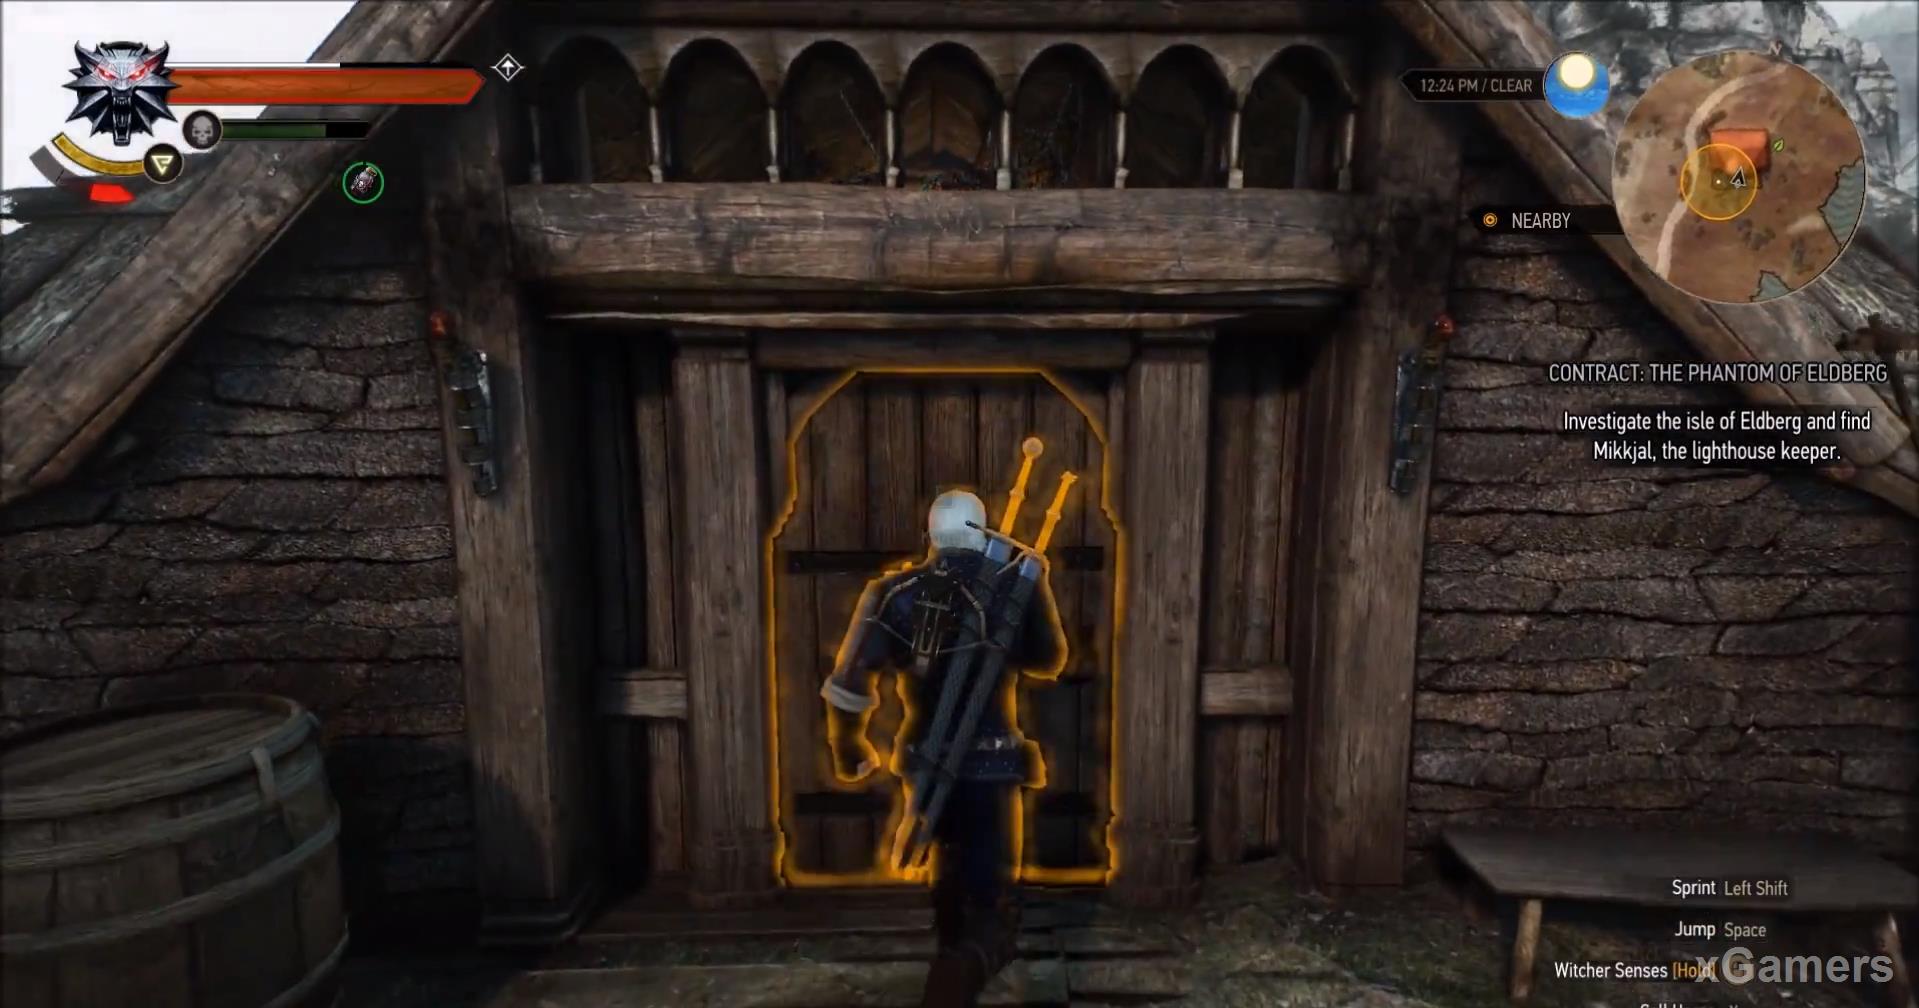 Geralt discovers the dwelling of the caretaker and knocking on the door and get acquainted with the only living person on the island